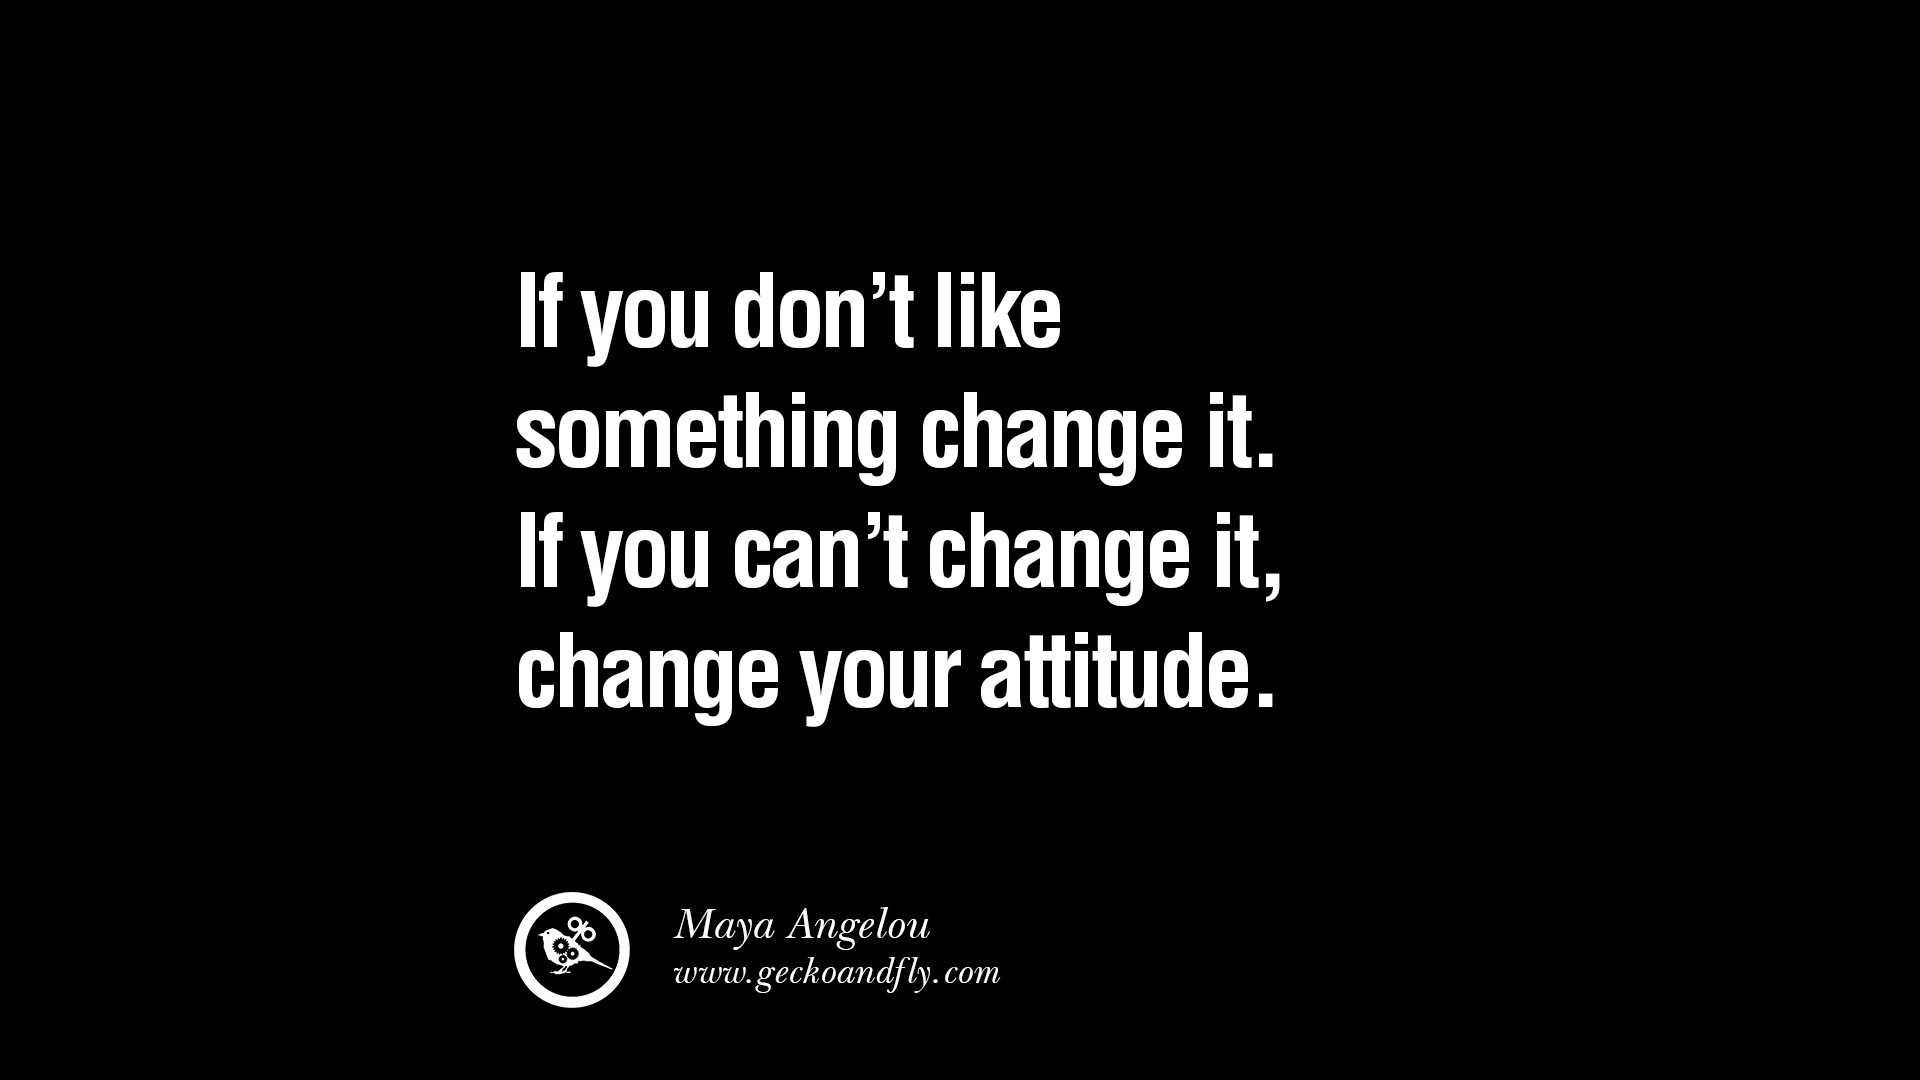 If you don’t like something change it. If you can’t change it, change your attitude.